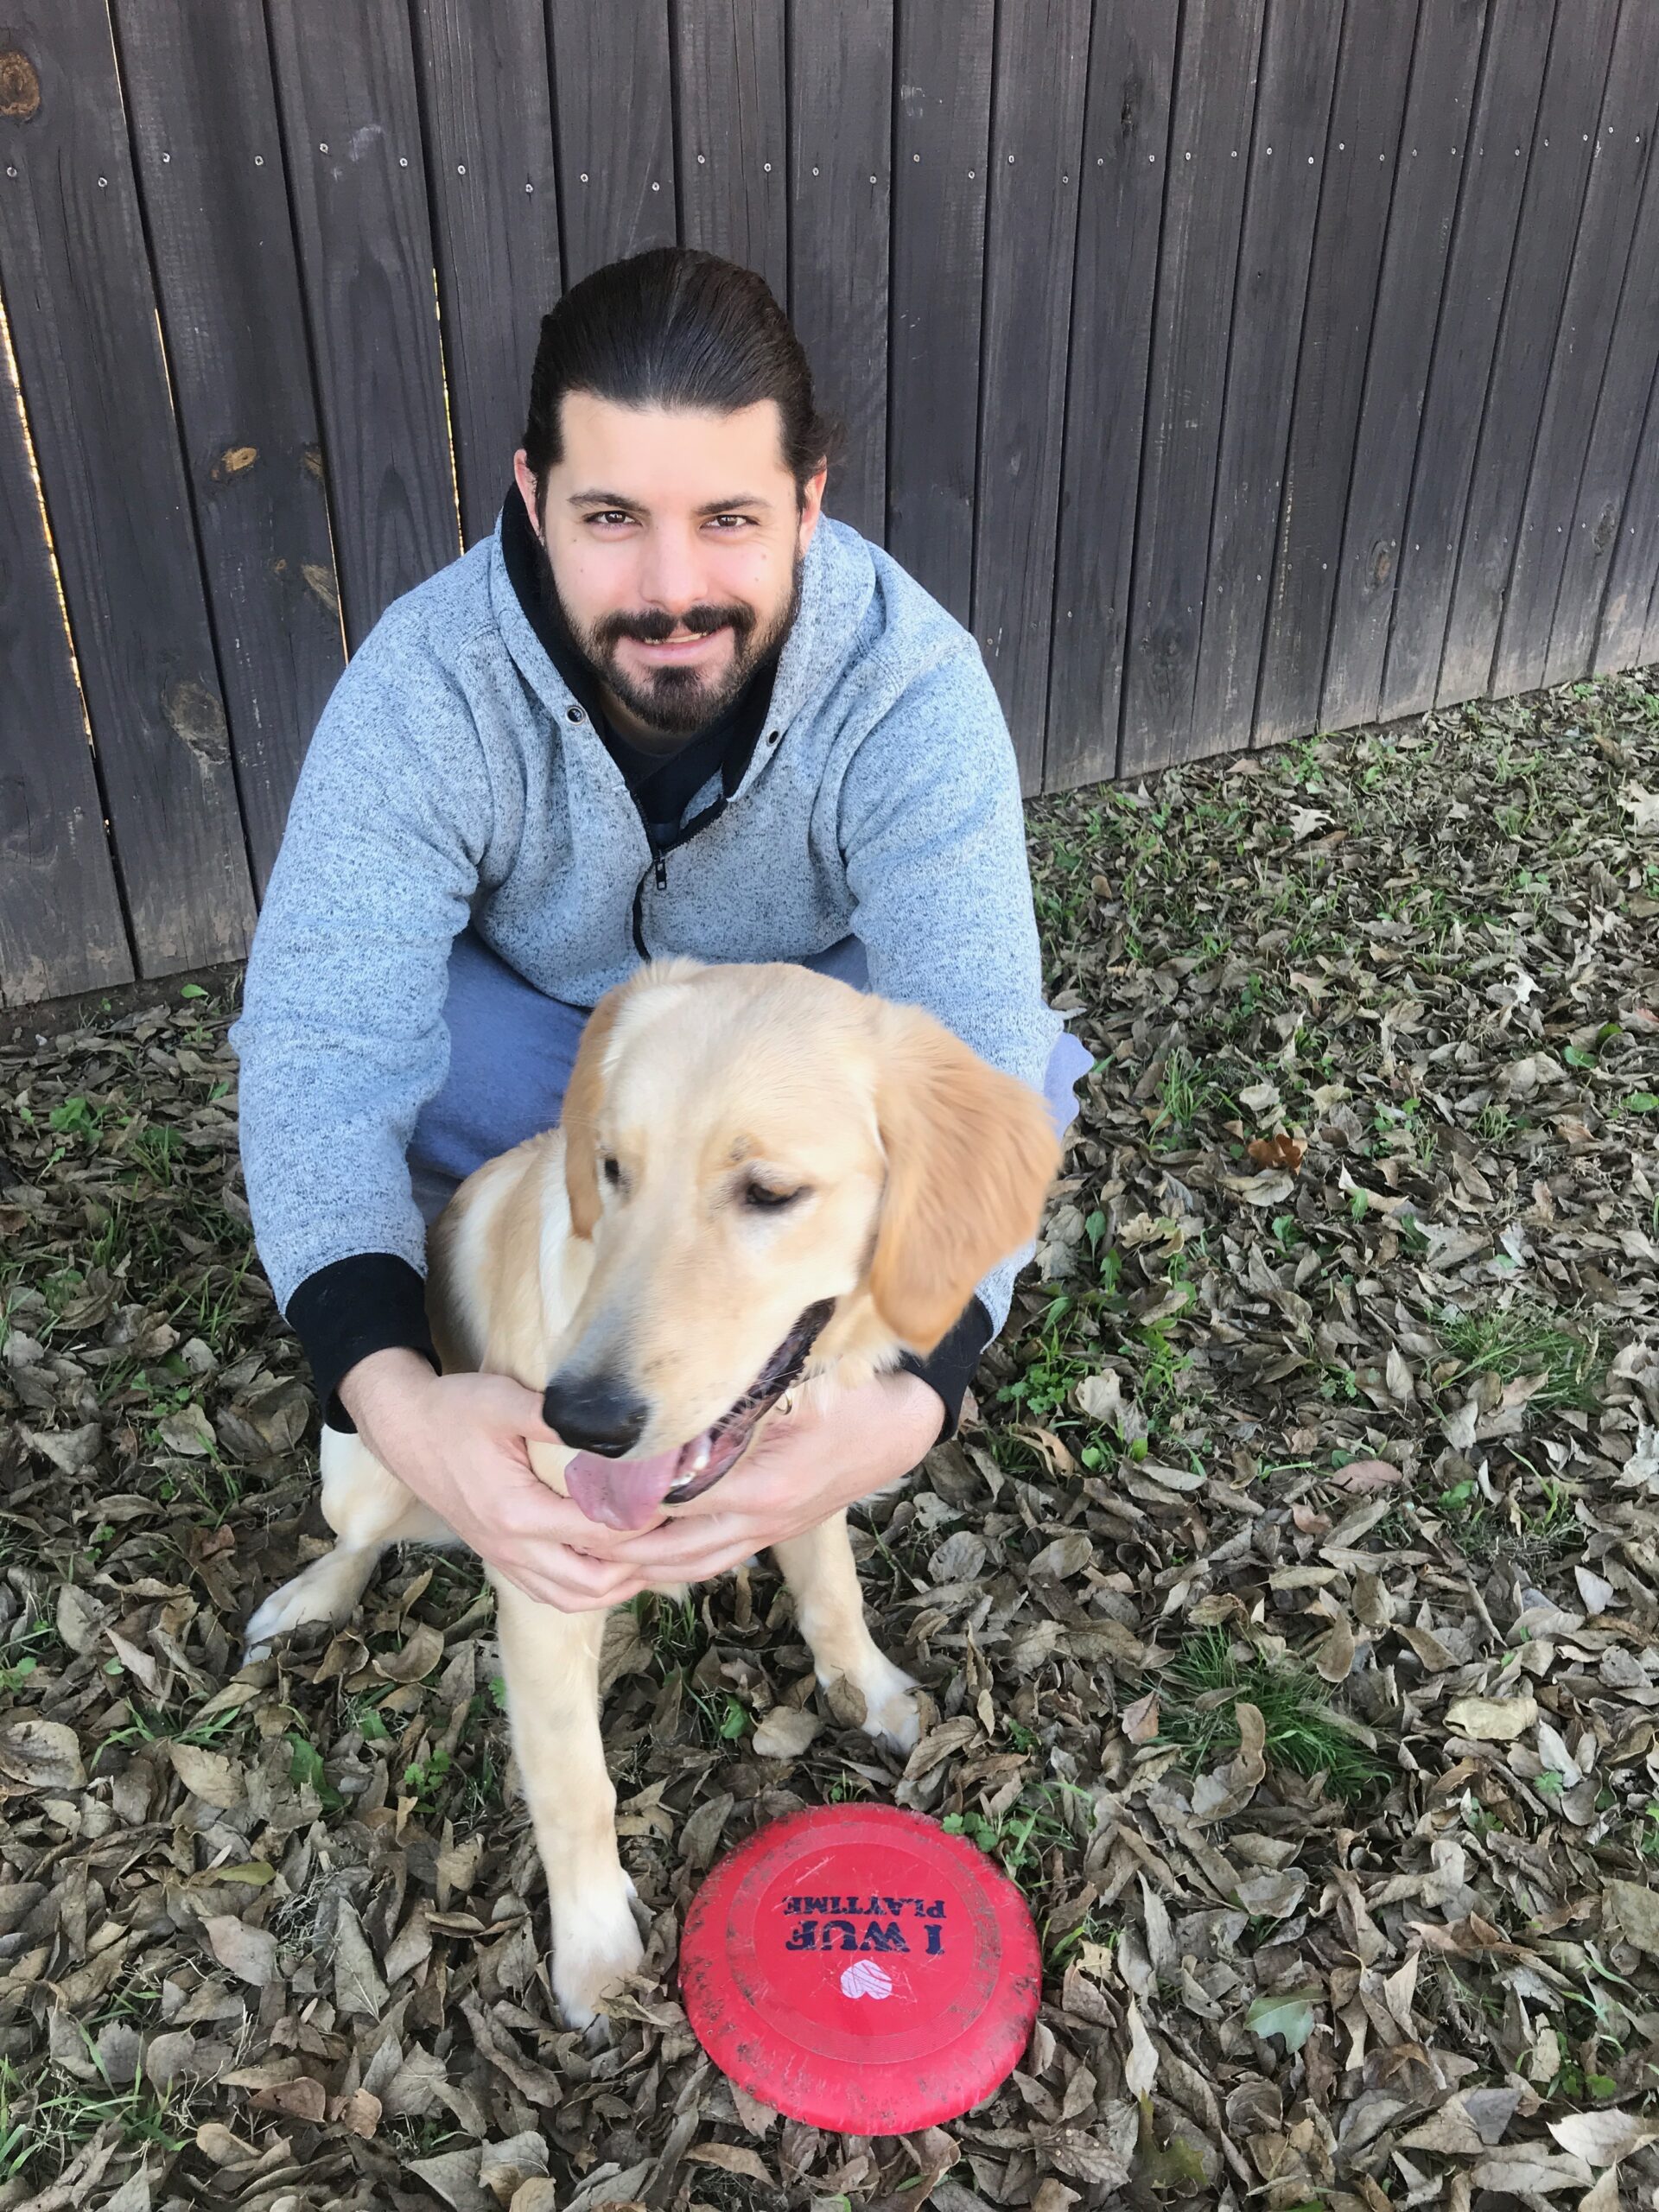 New trainer holding a dog